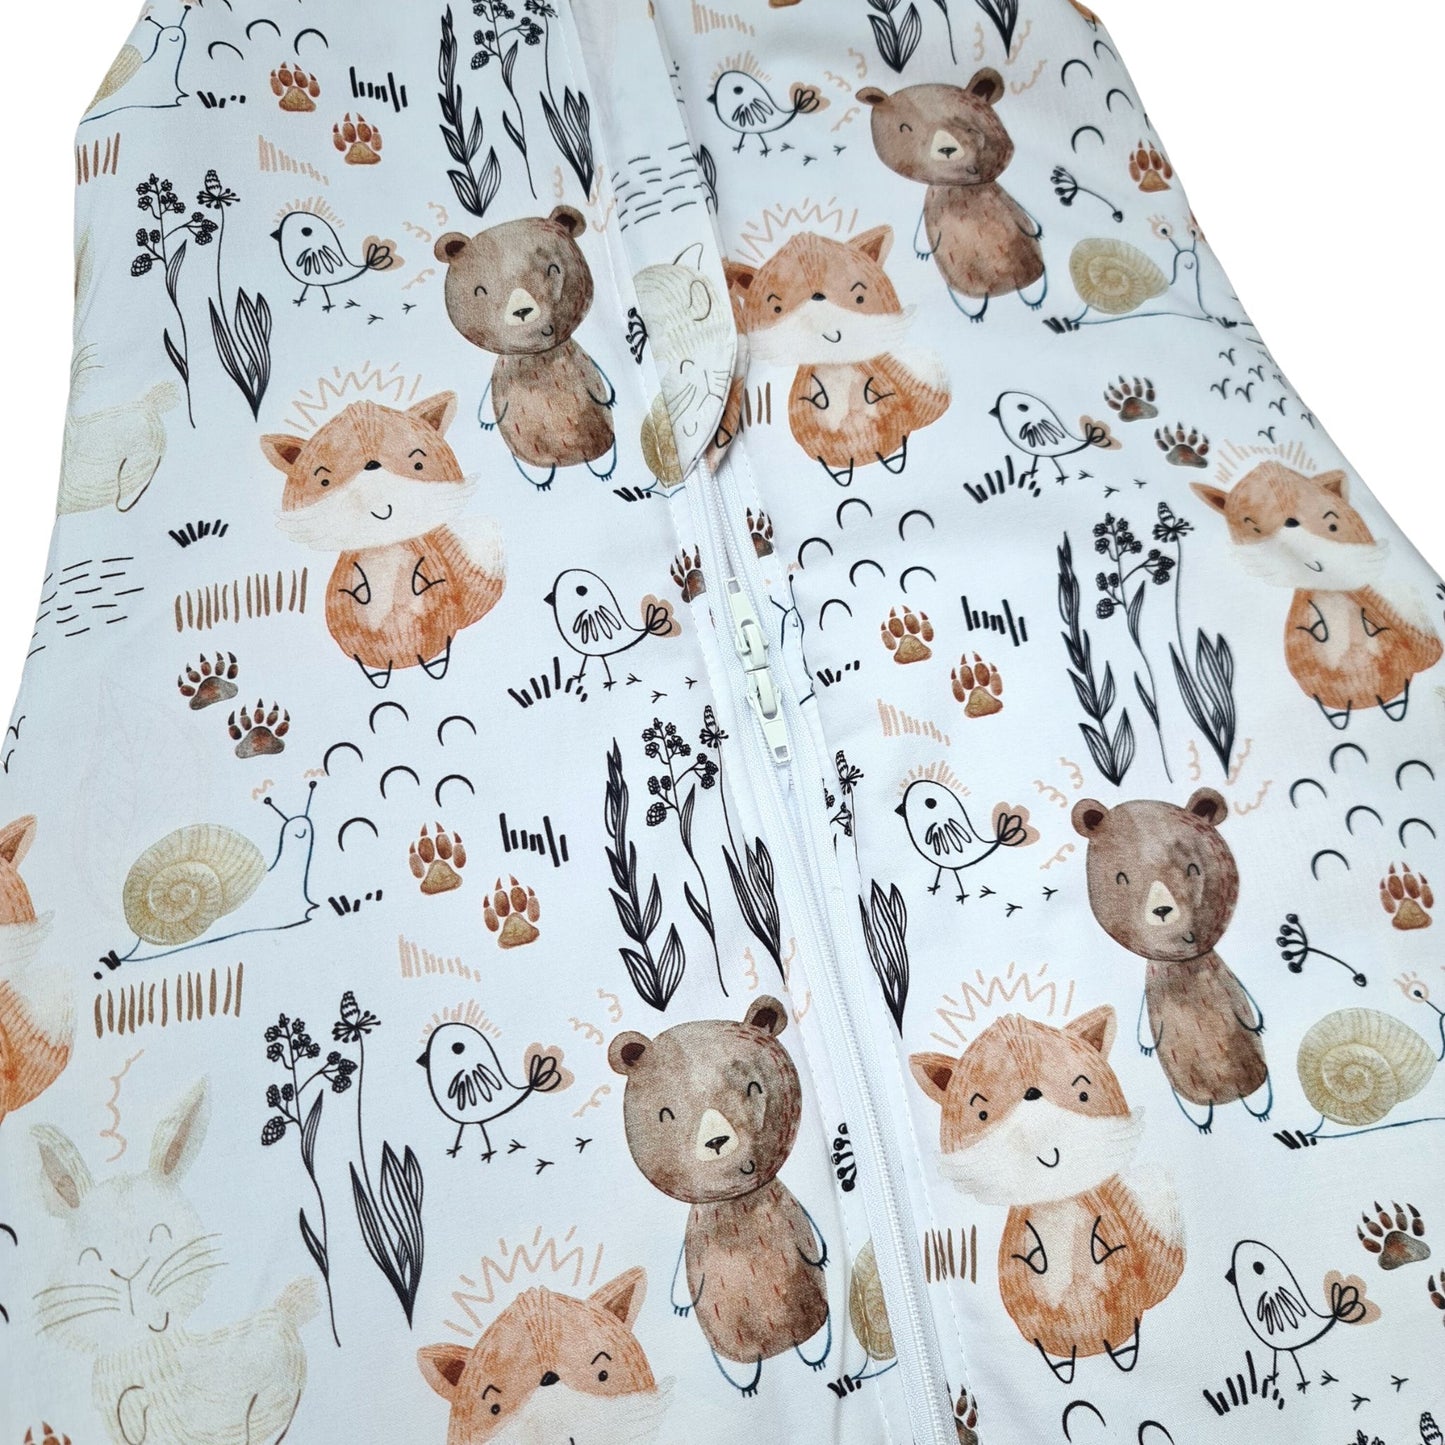 toddlers sleeping bag with feet in Ireland forest animals pattern